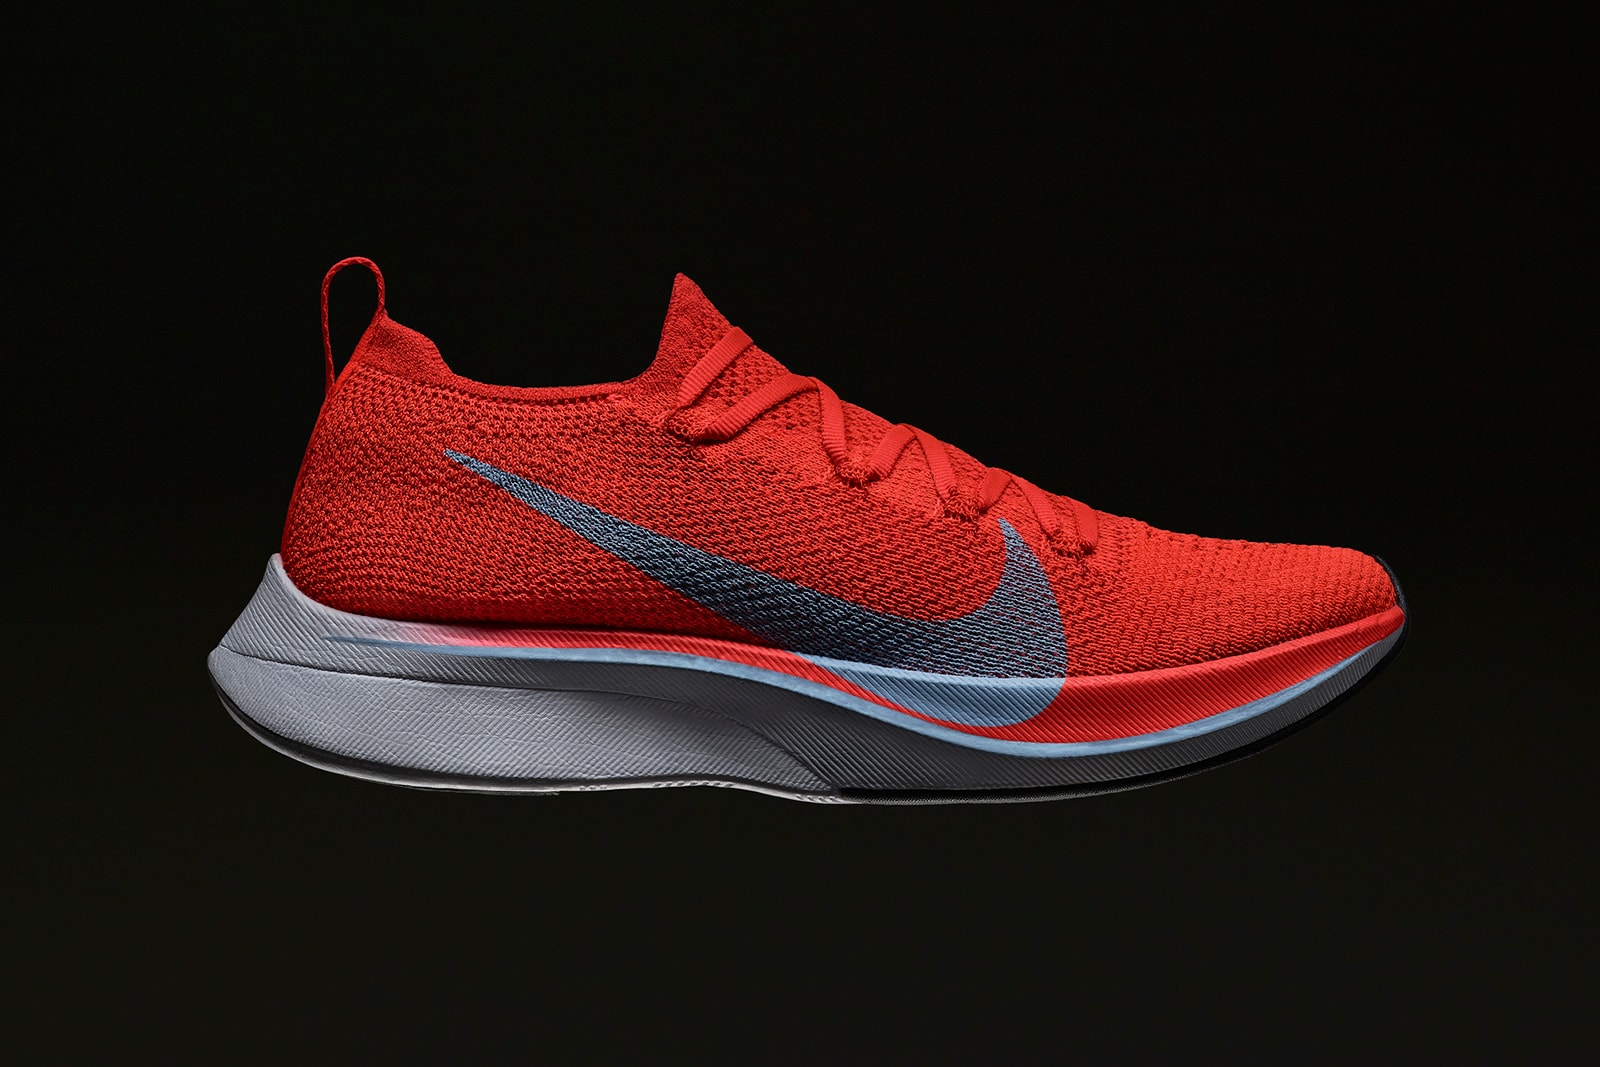 Nike Zoom Vaporfly 4% Flyknit Fly Sneaker Details Shoes Kicks Trainers Sneakers Footwear Cop Purchase Buy $250 USD September 13 October 4 Marathon Running Efficient Lightweight Durable